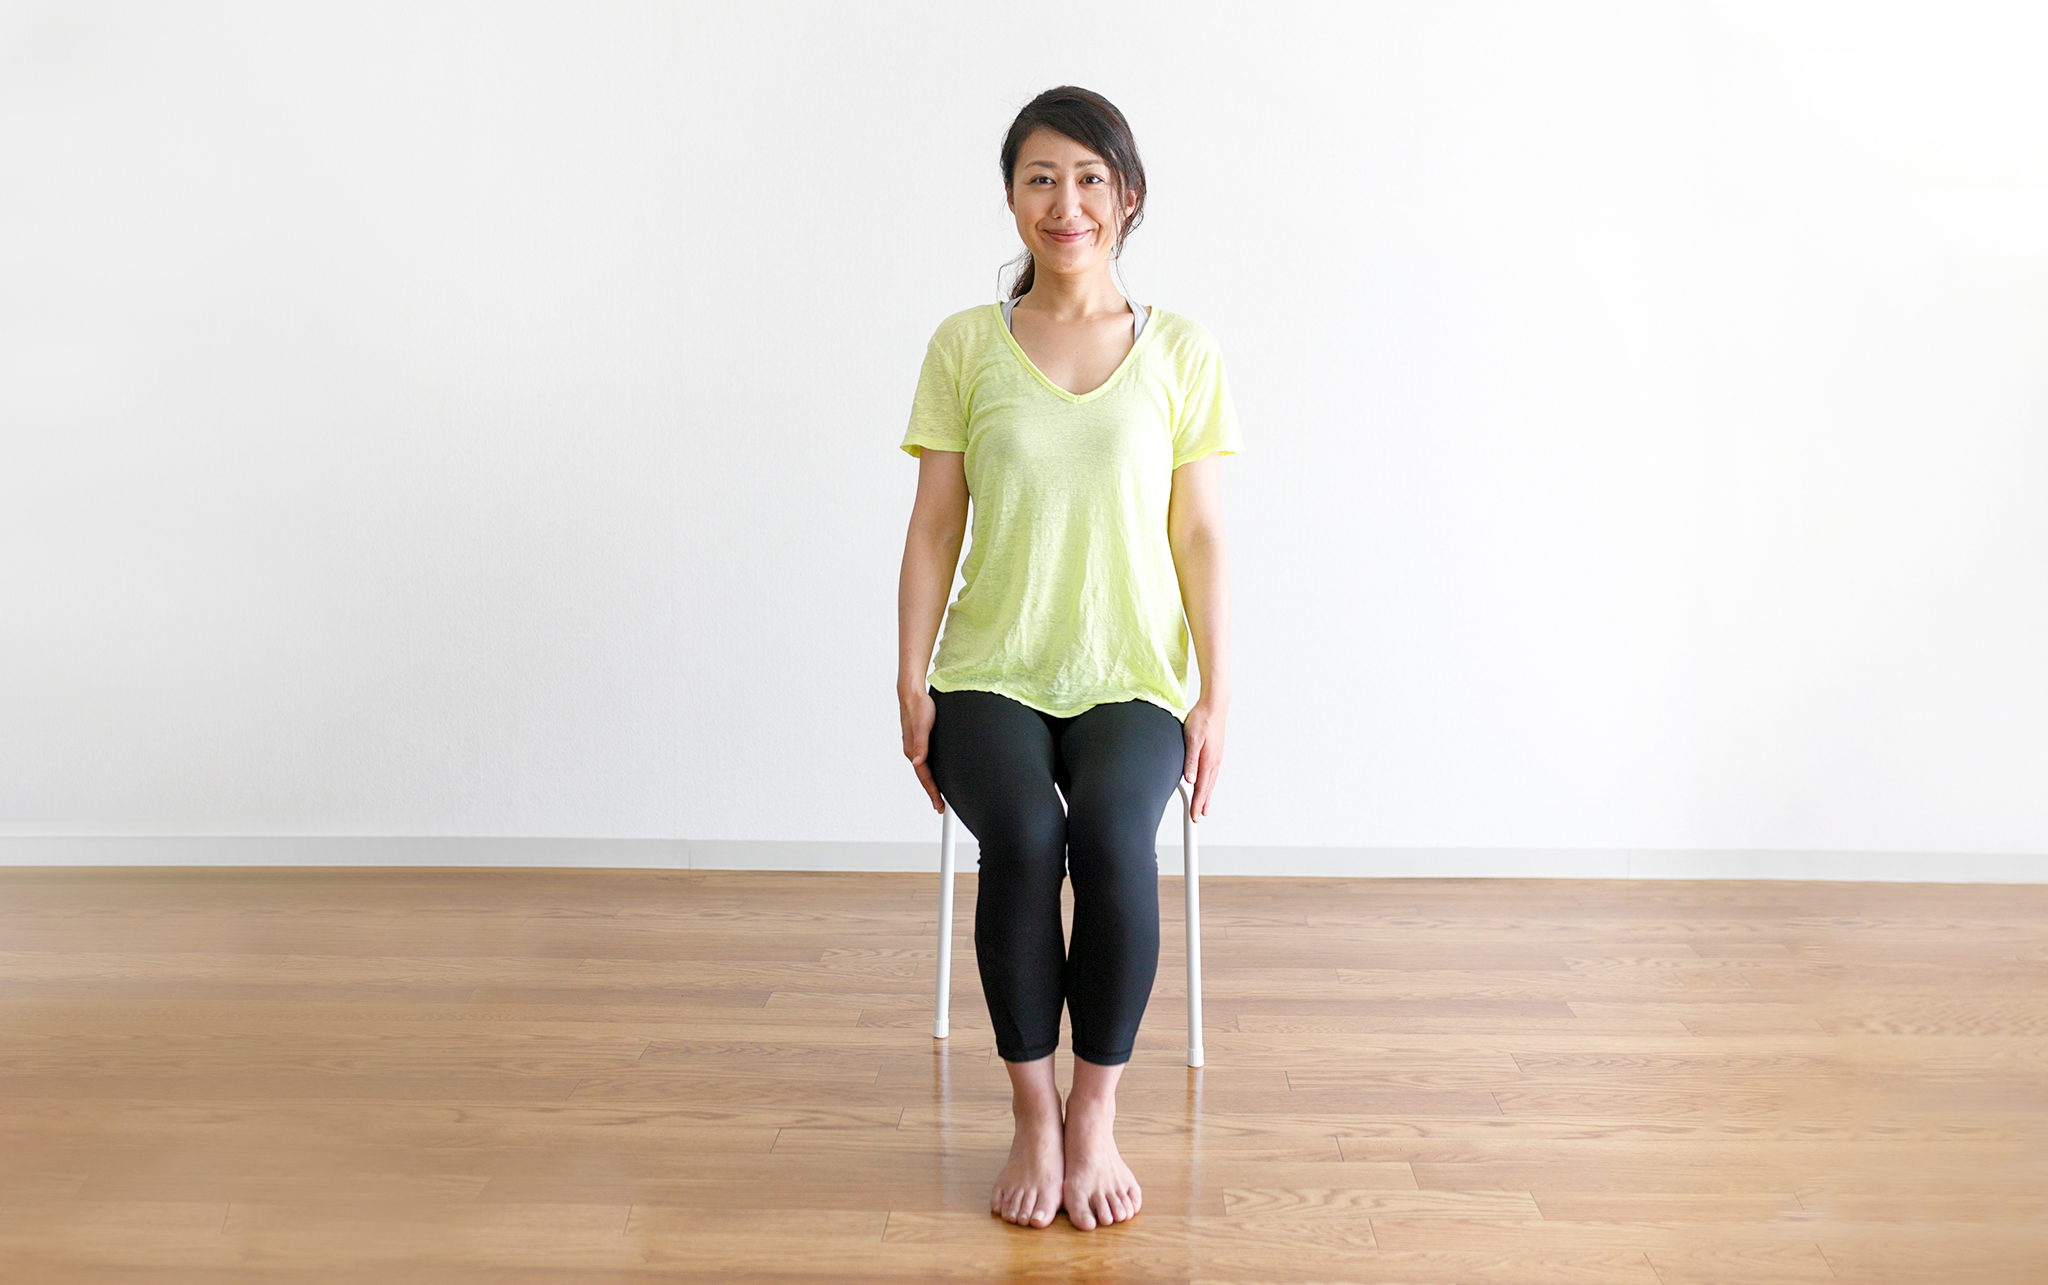 Seated Chair Yoga Poses